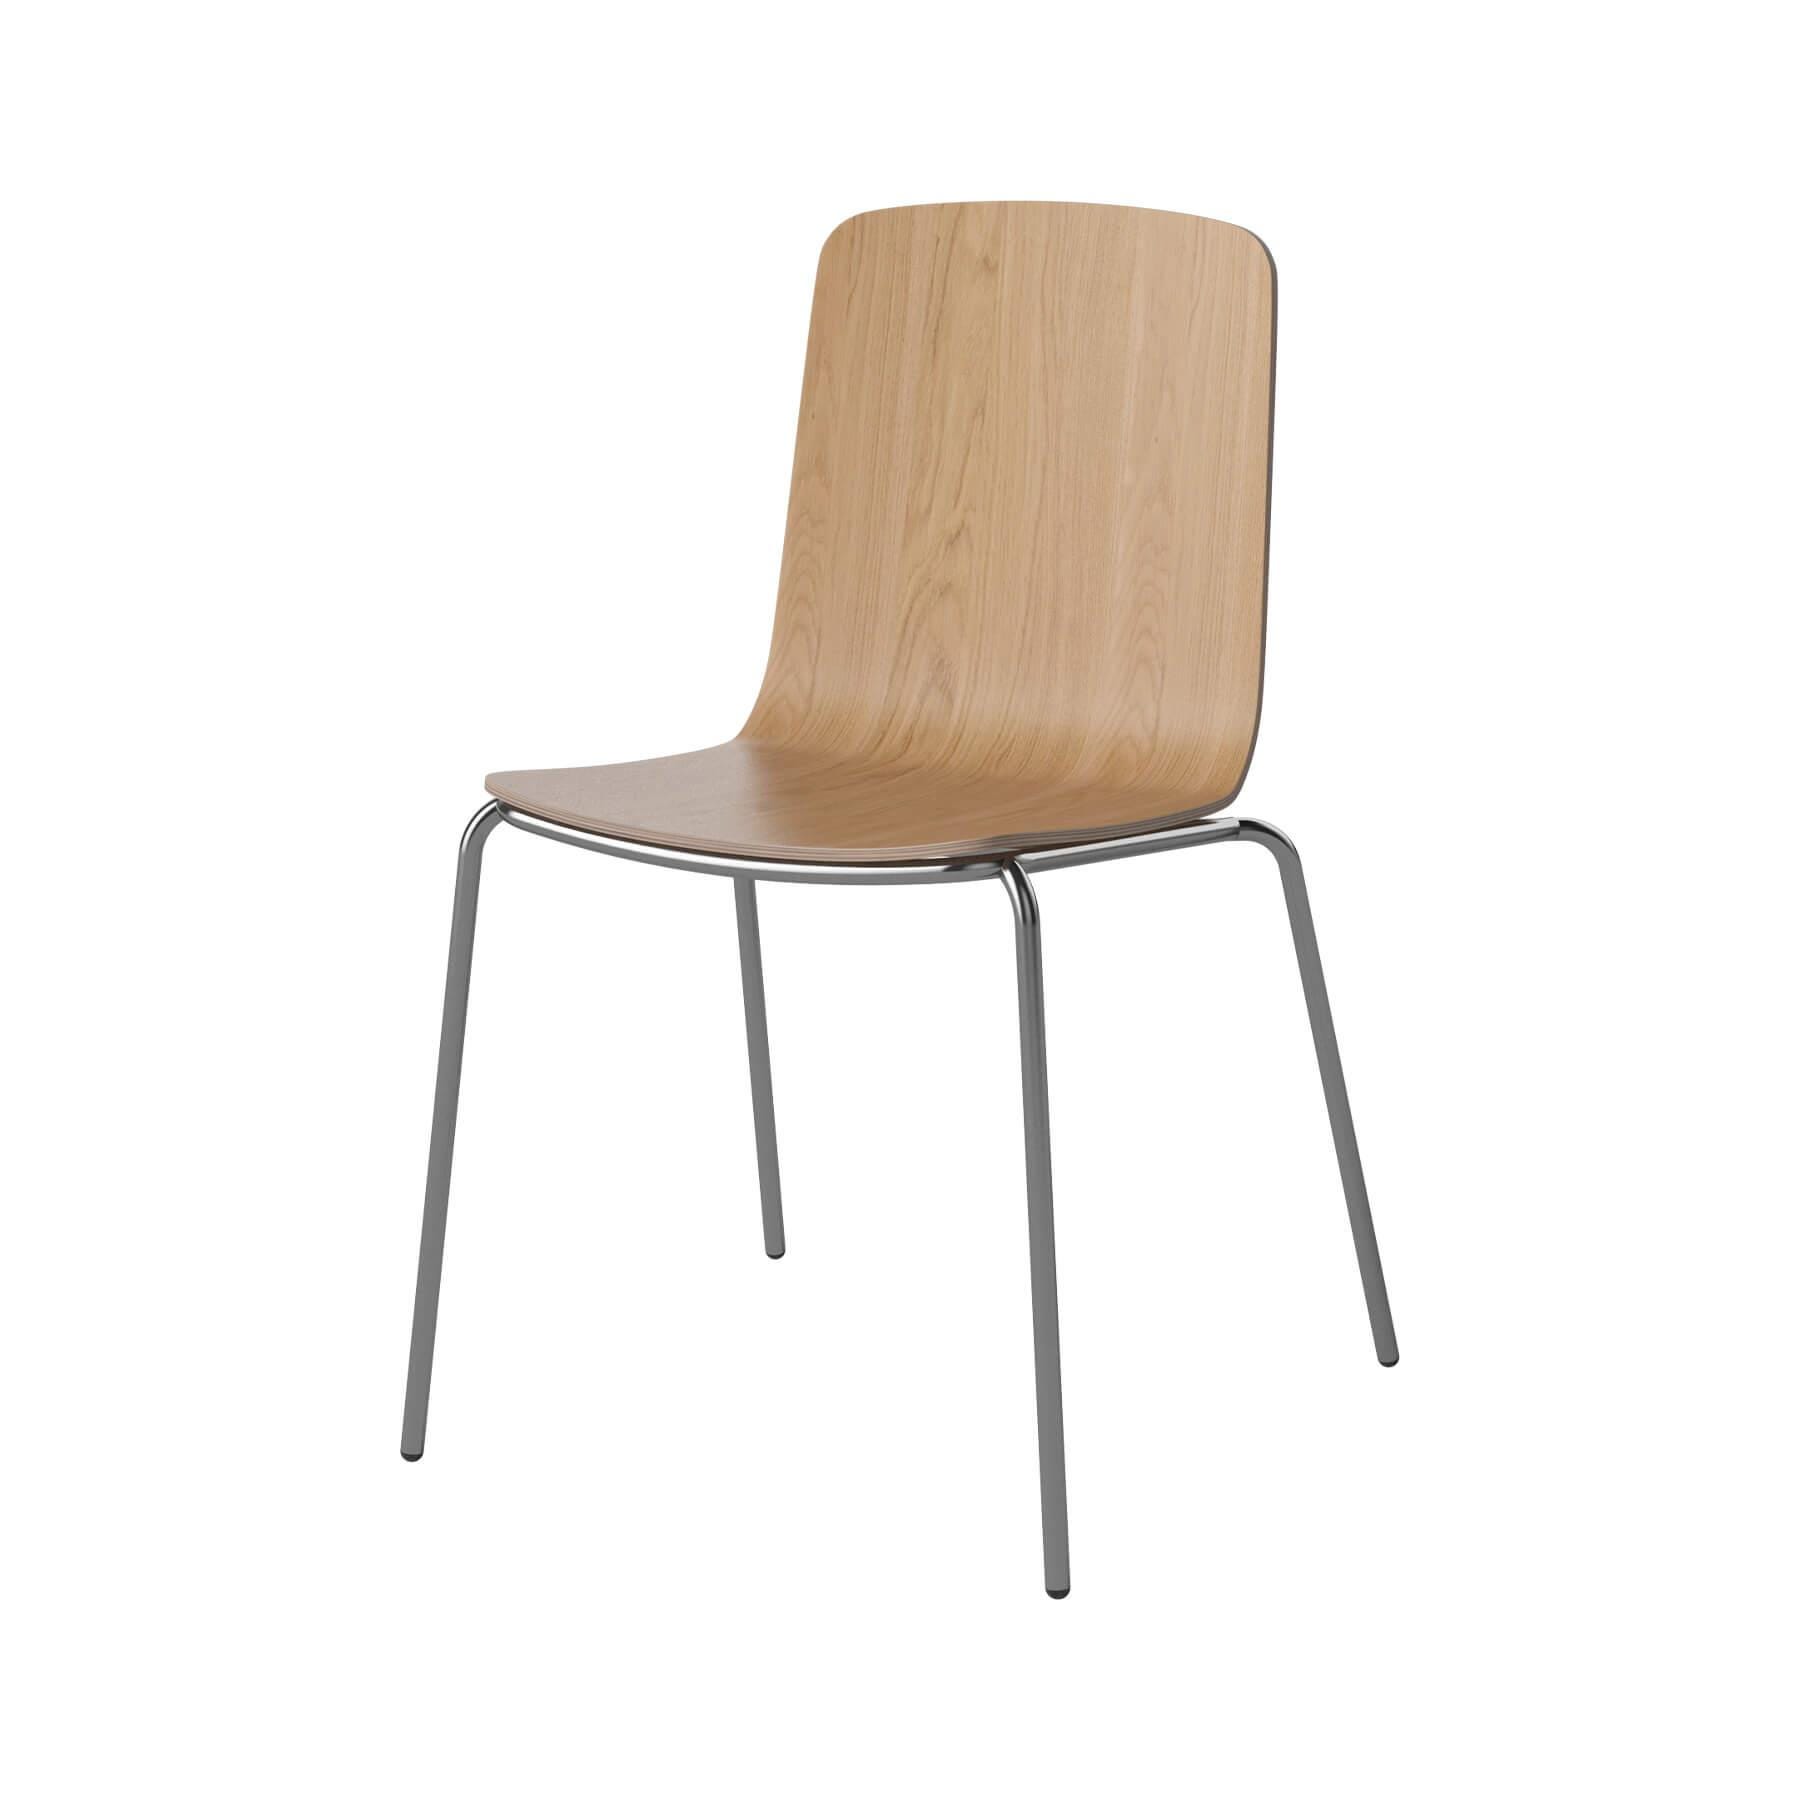 Bolia Palm Dining Chair Metal Legs Oiled Oak Chrome Plated Legs Light Wood Designer Furniture From Holloways Of Ludlow